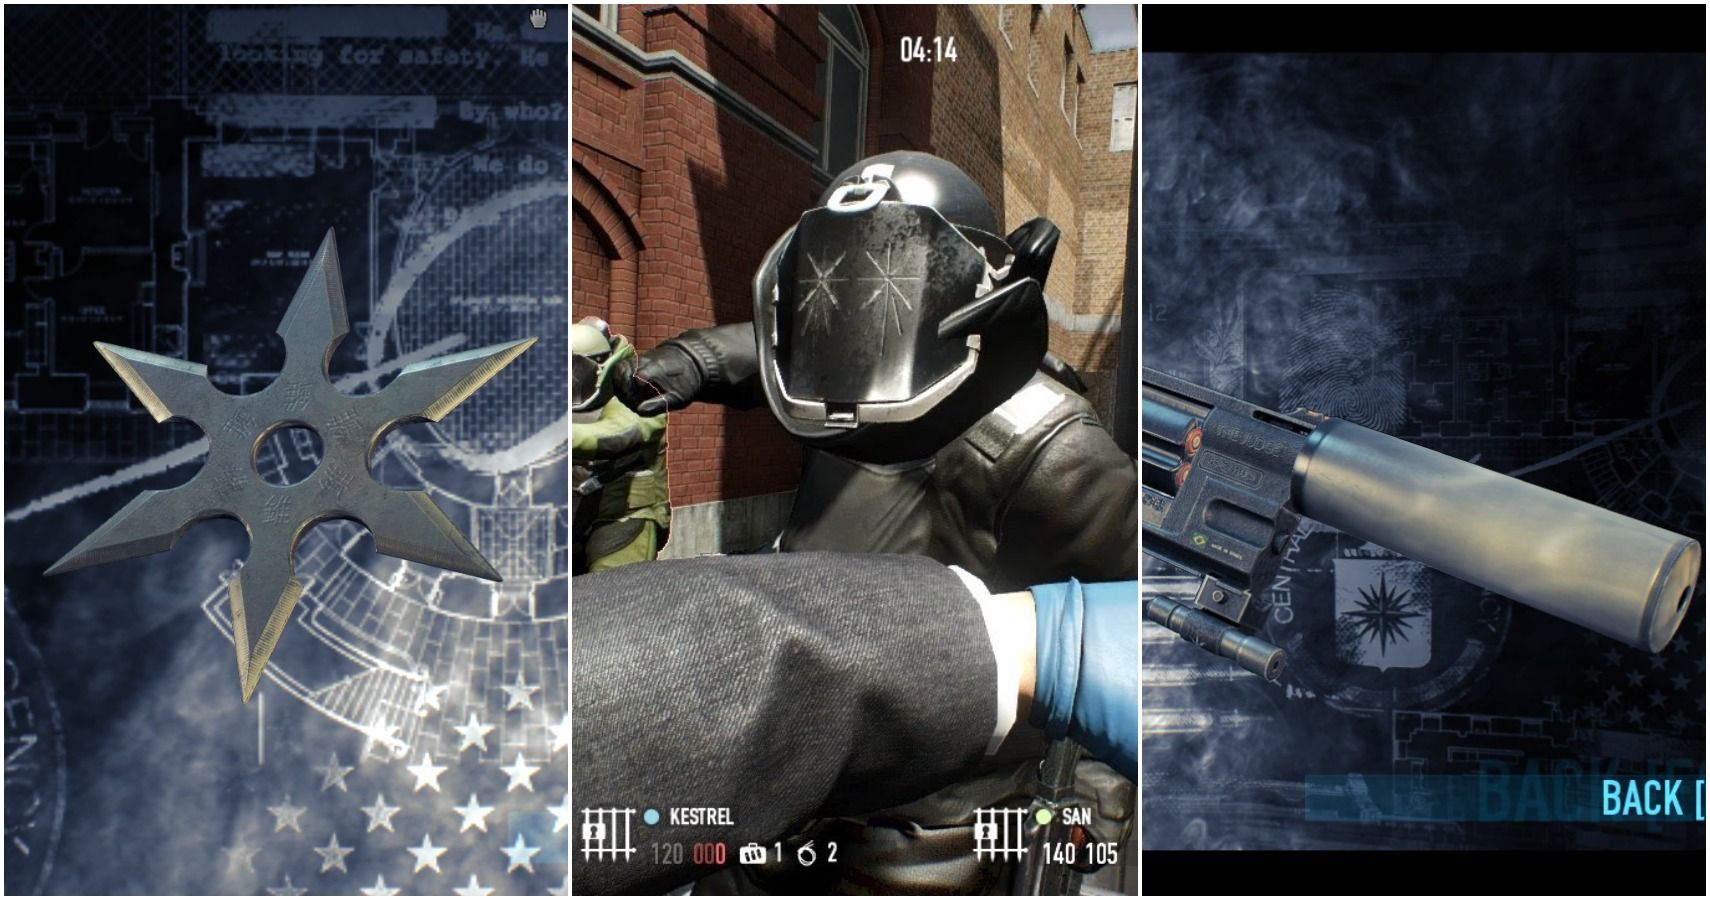 overdrill stealth mod payday 2